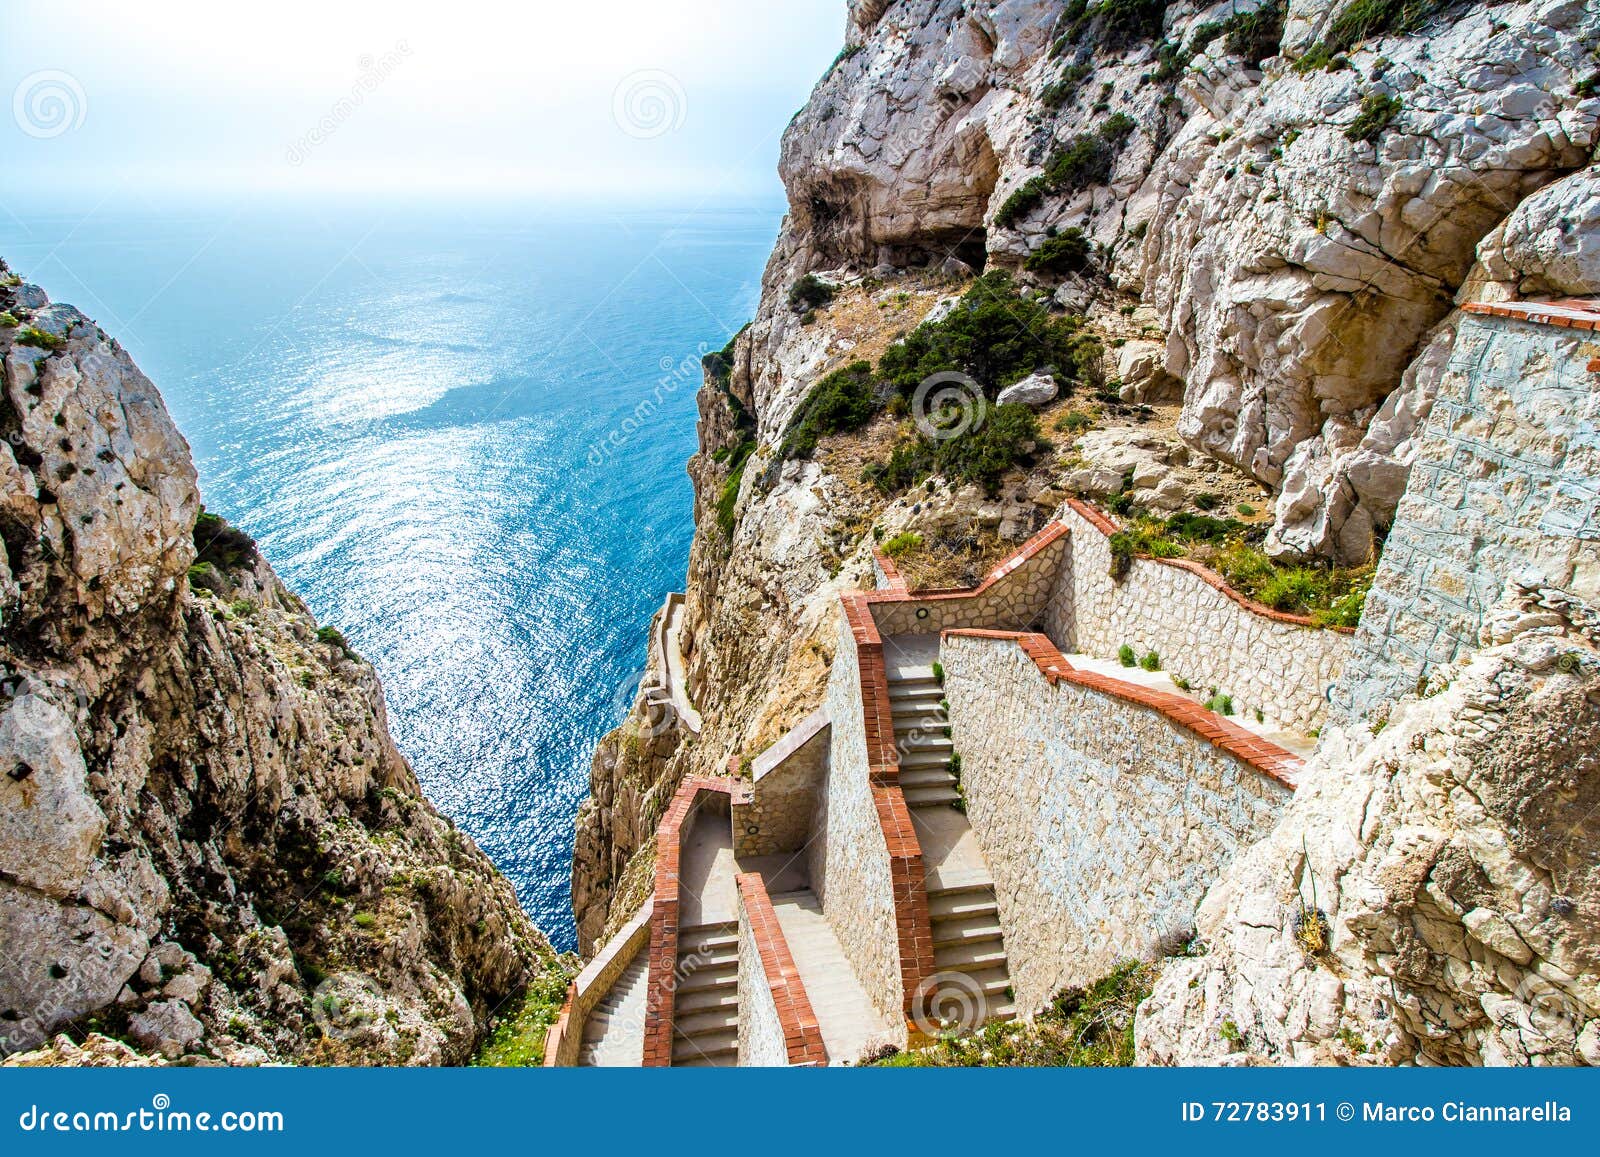 the stairway leading to the neptune's grotto,near alghero, in sa